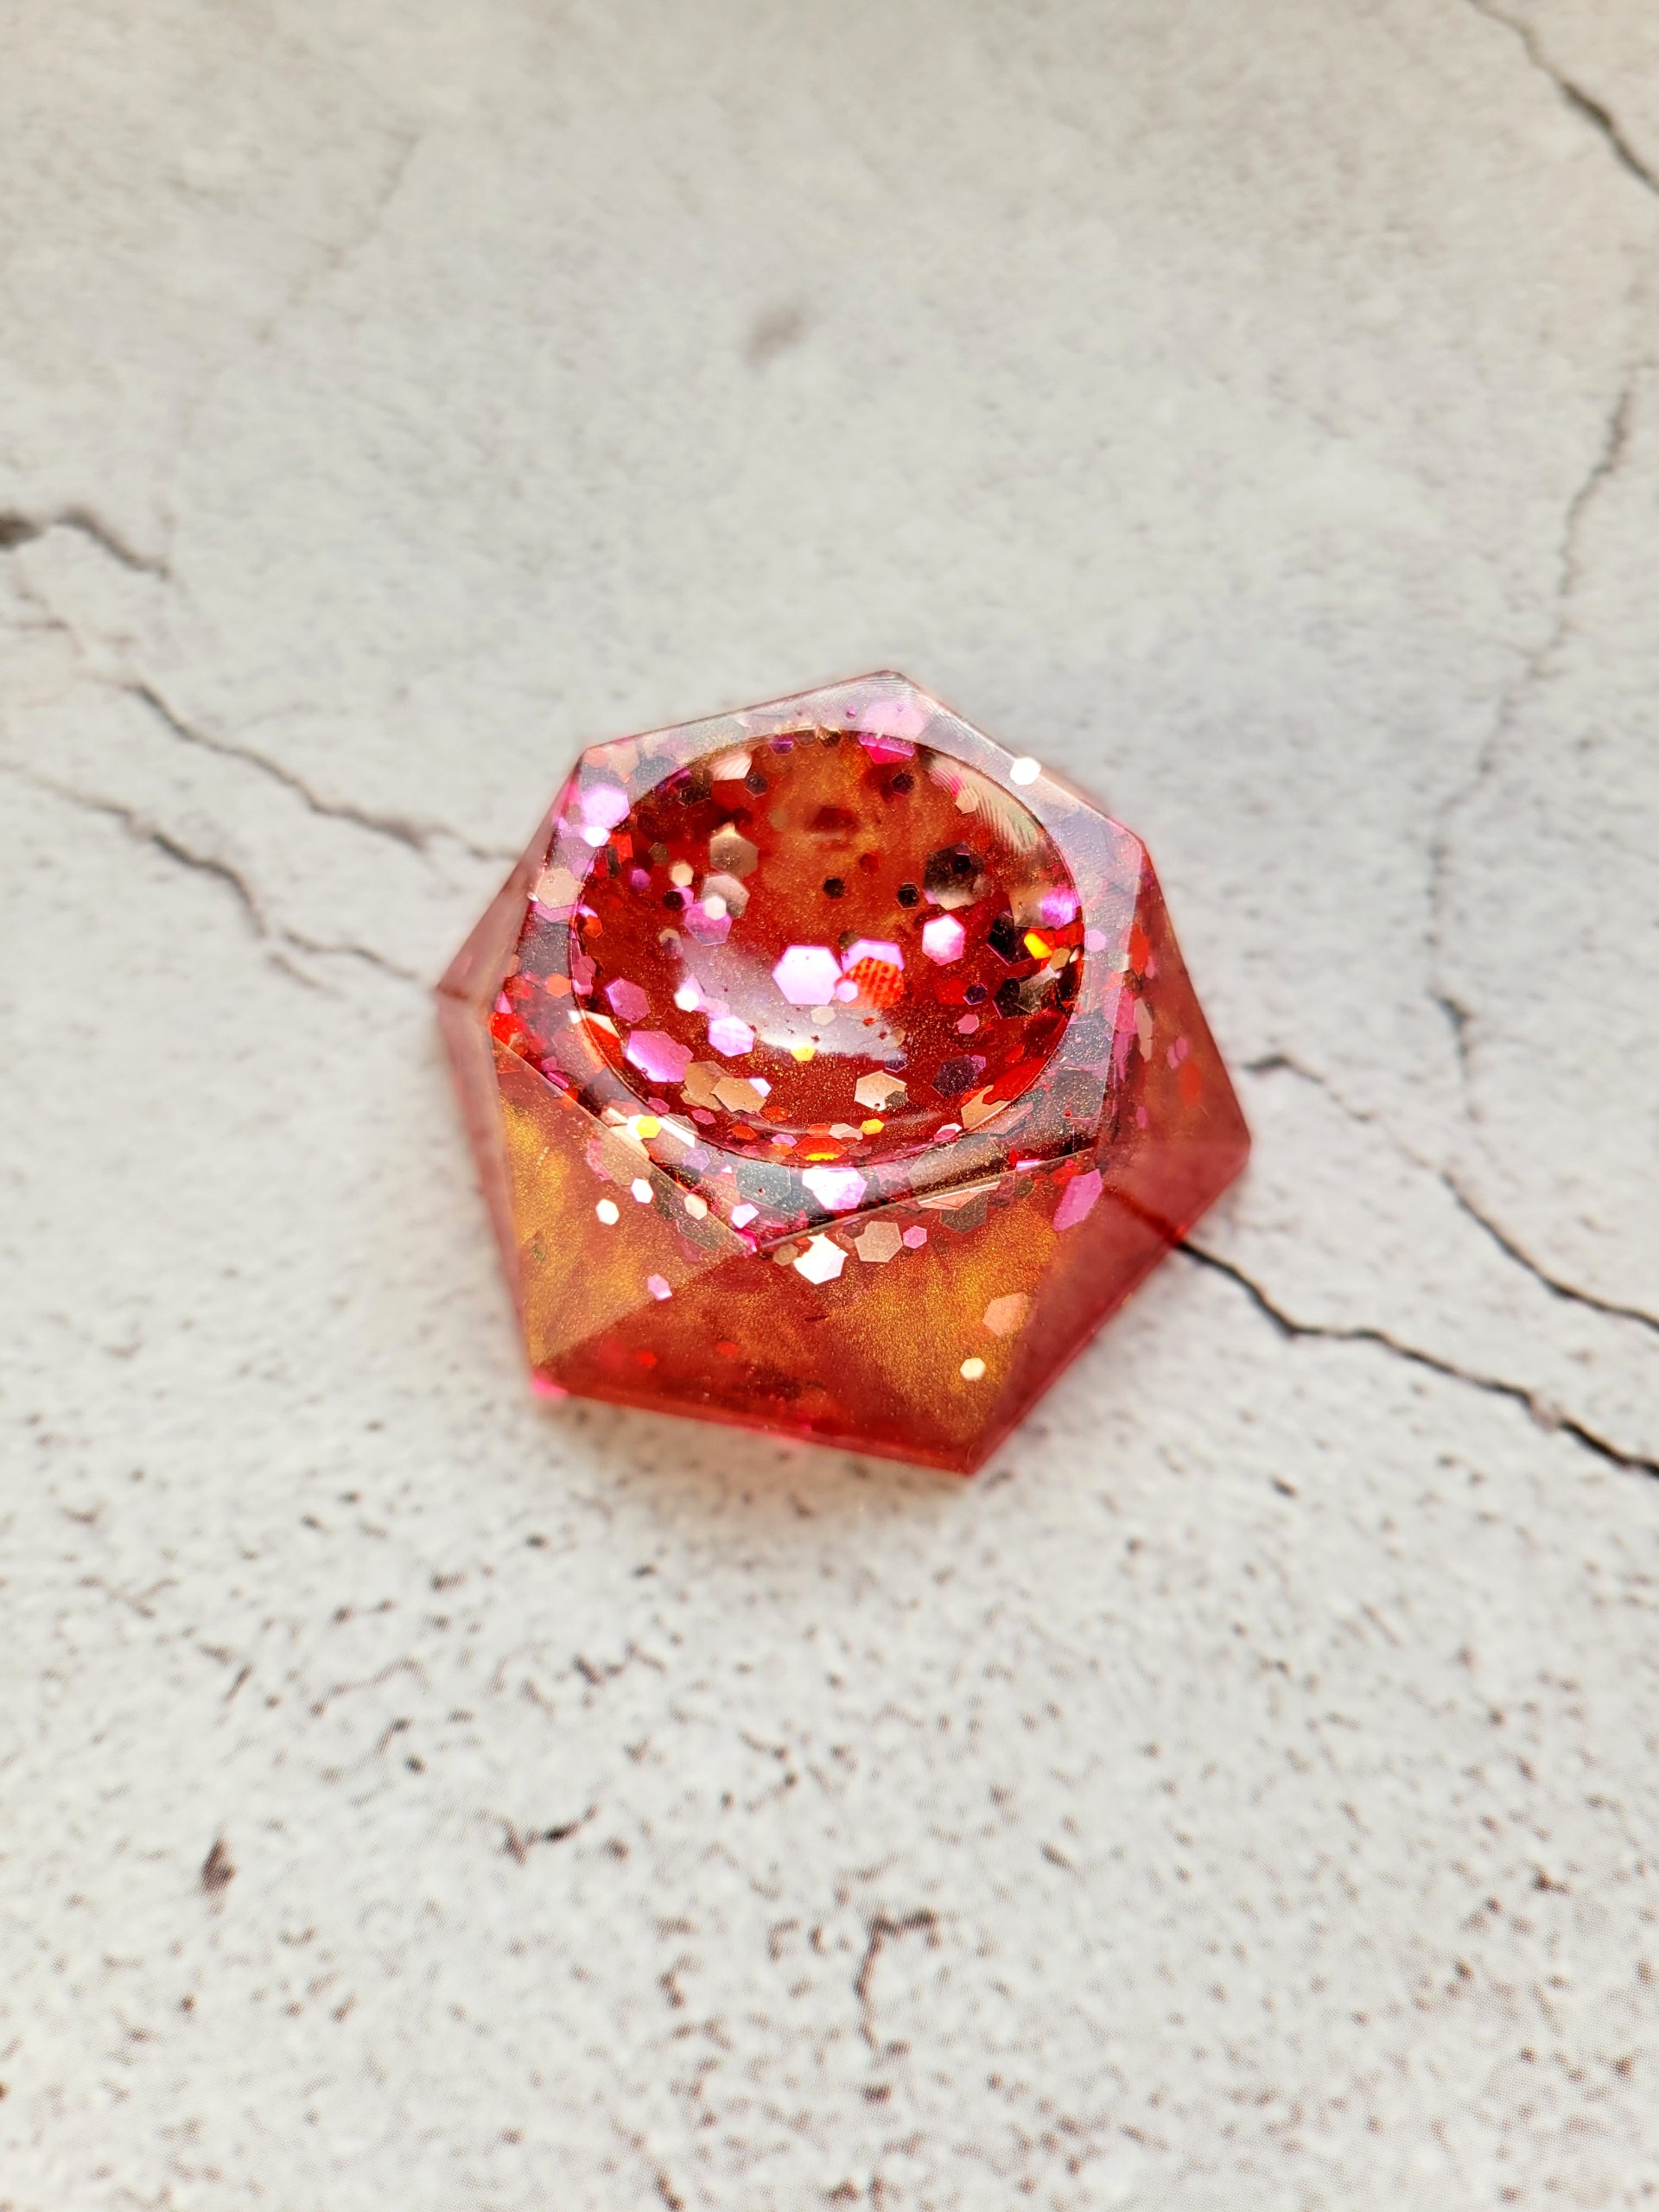 A side view of a hexagonal stand for dice or tabletop familiars. It's red and orange with glitter.